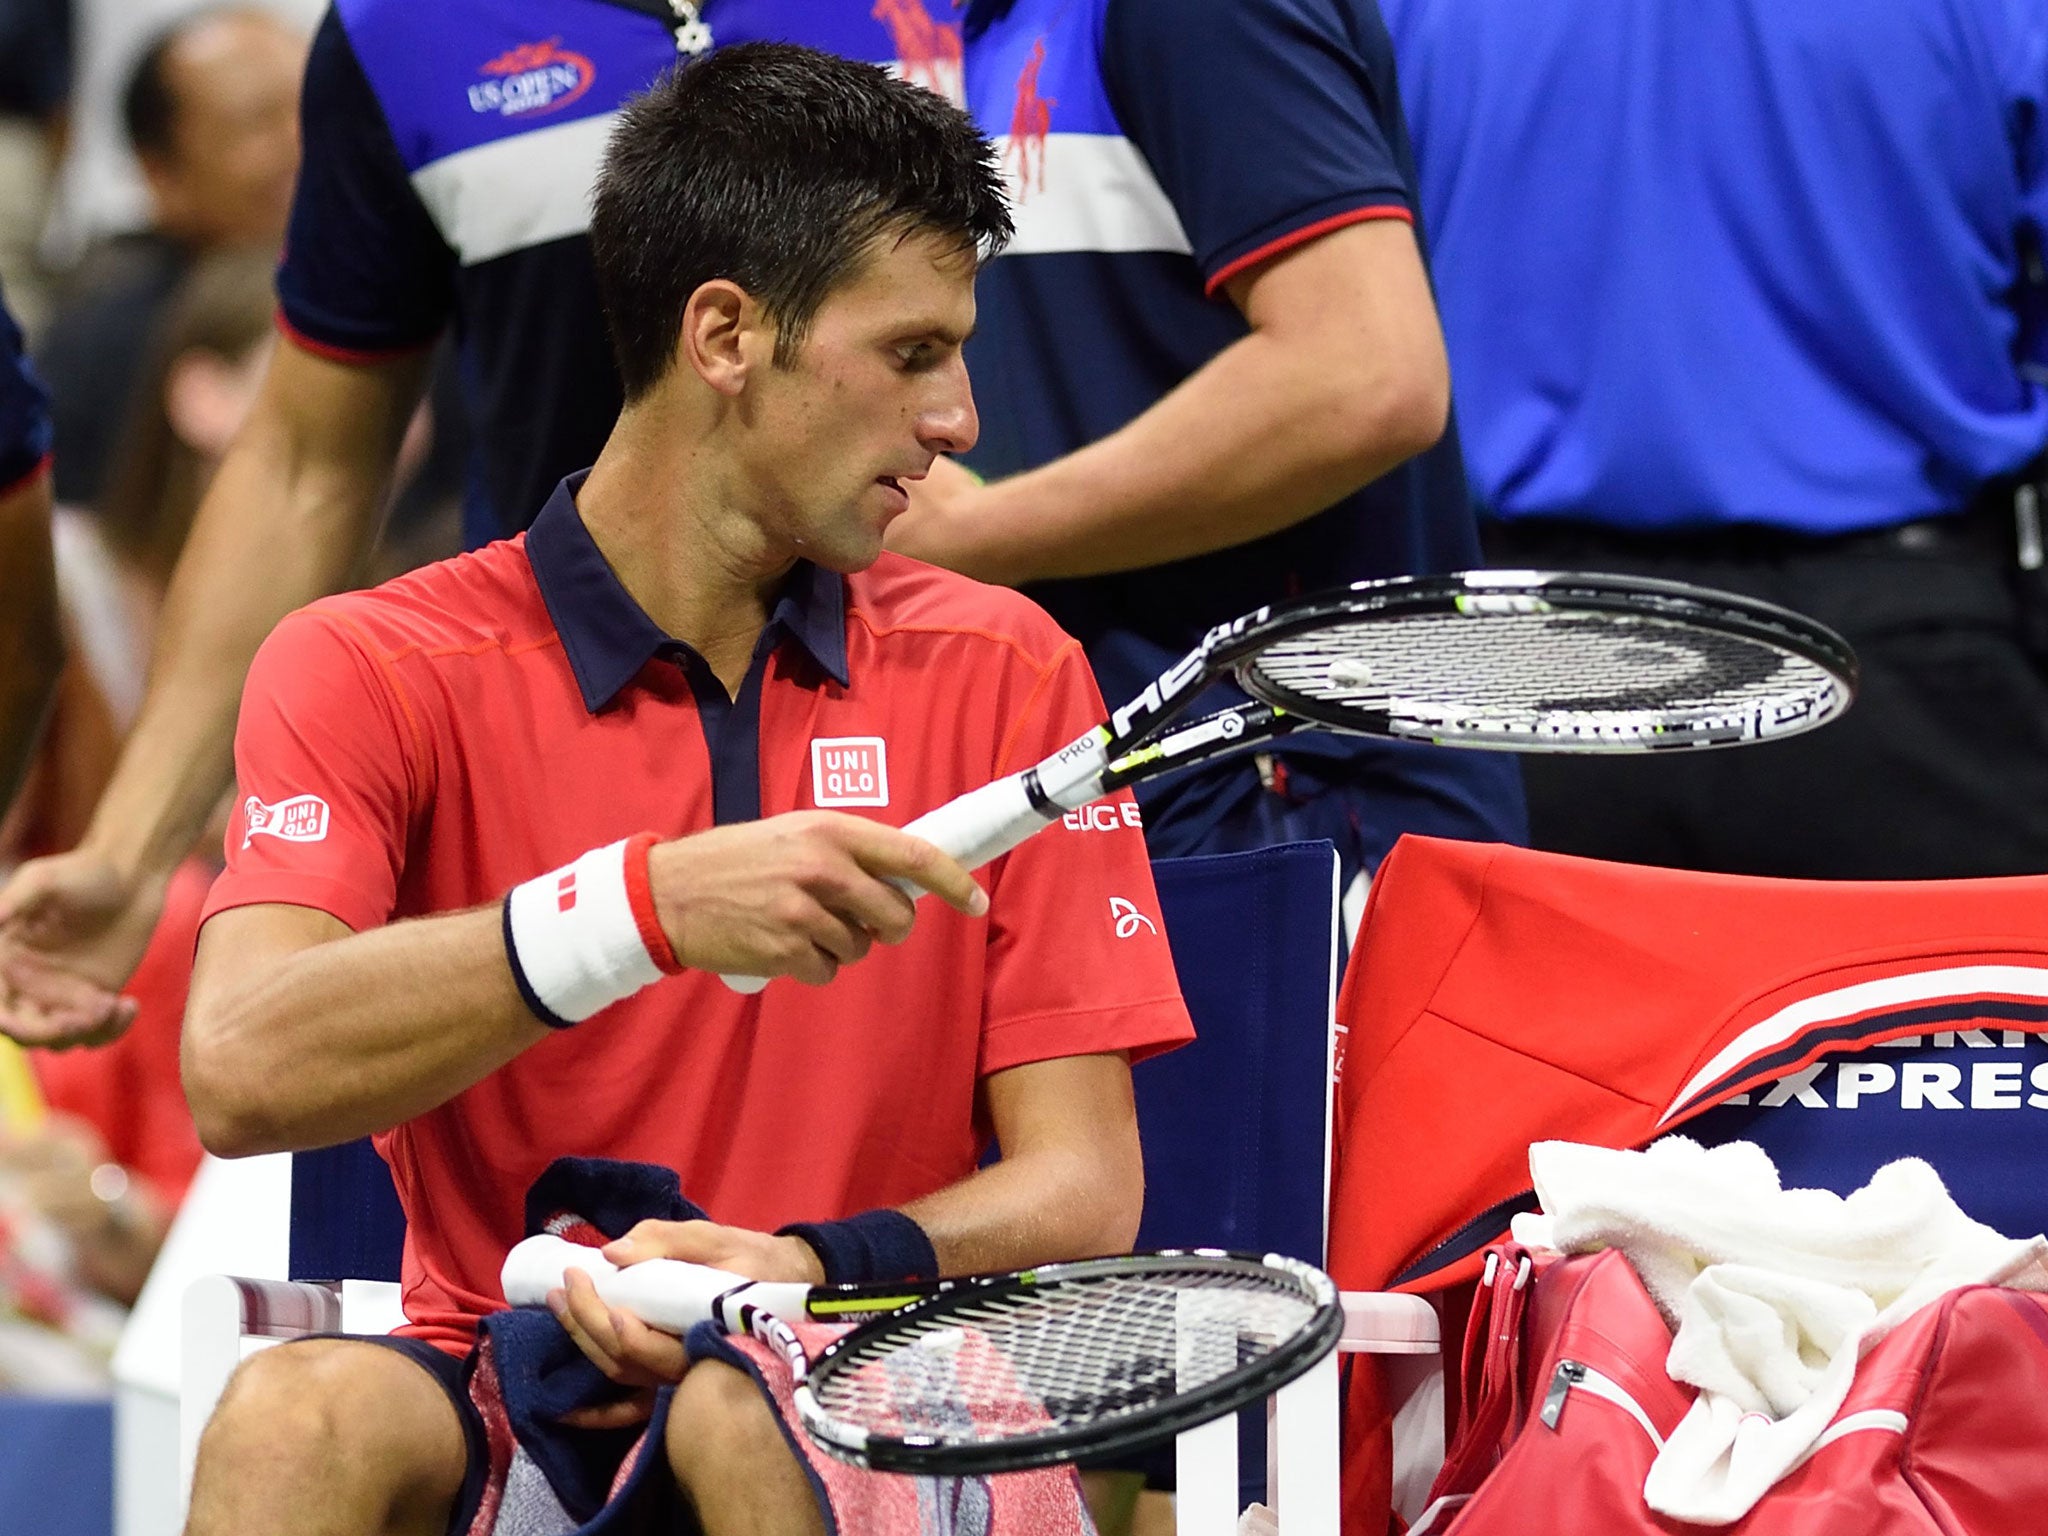 Novak Djokovic with a broken racket after stamping on it in frustration